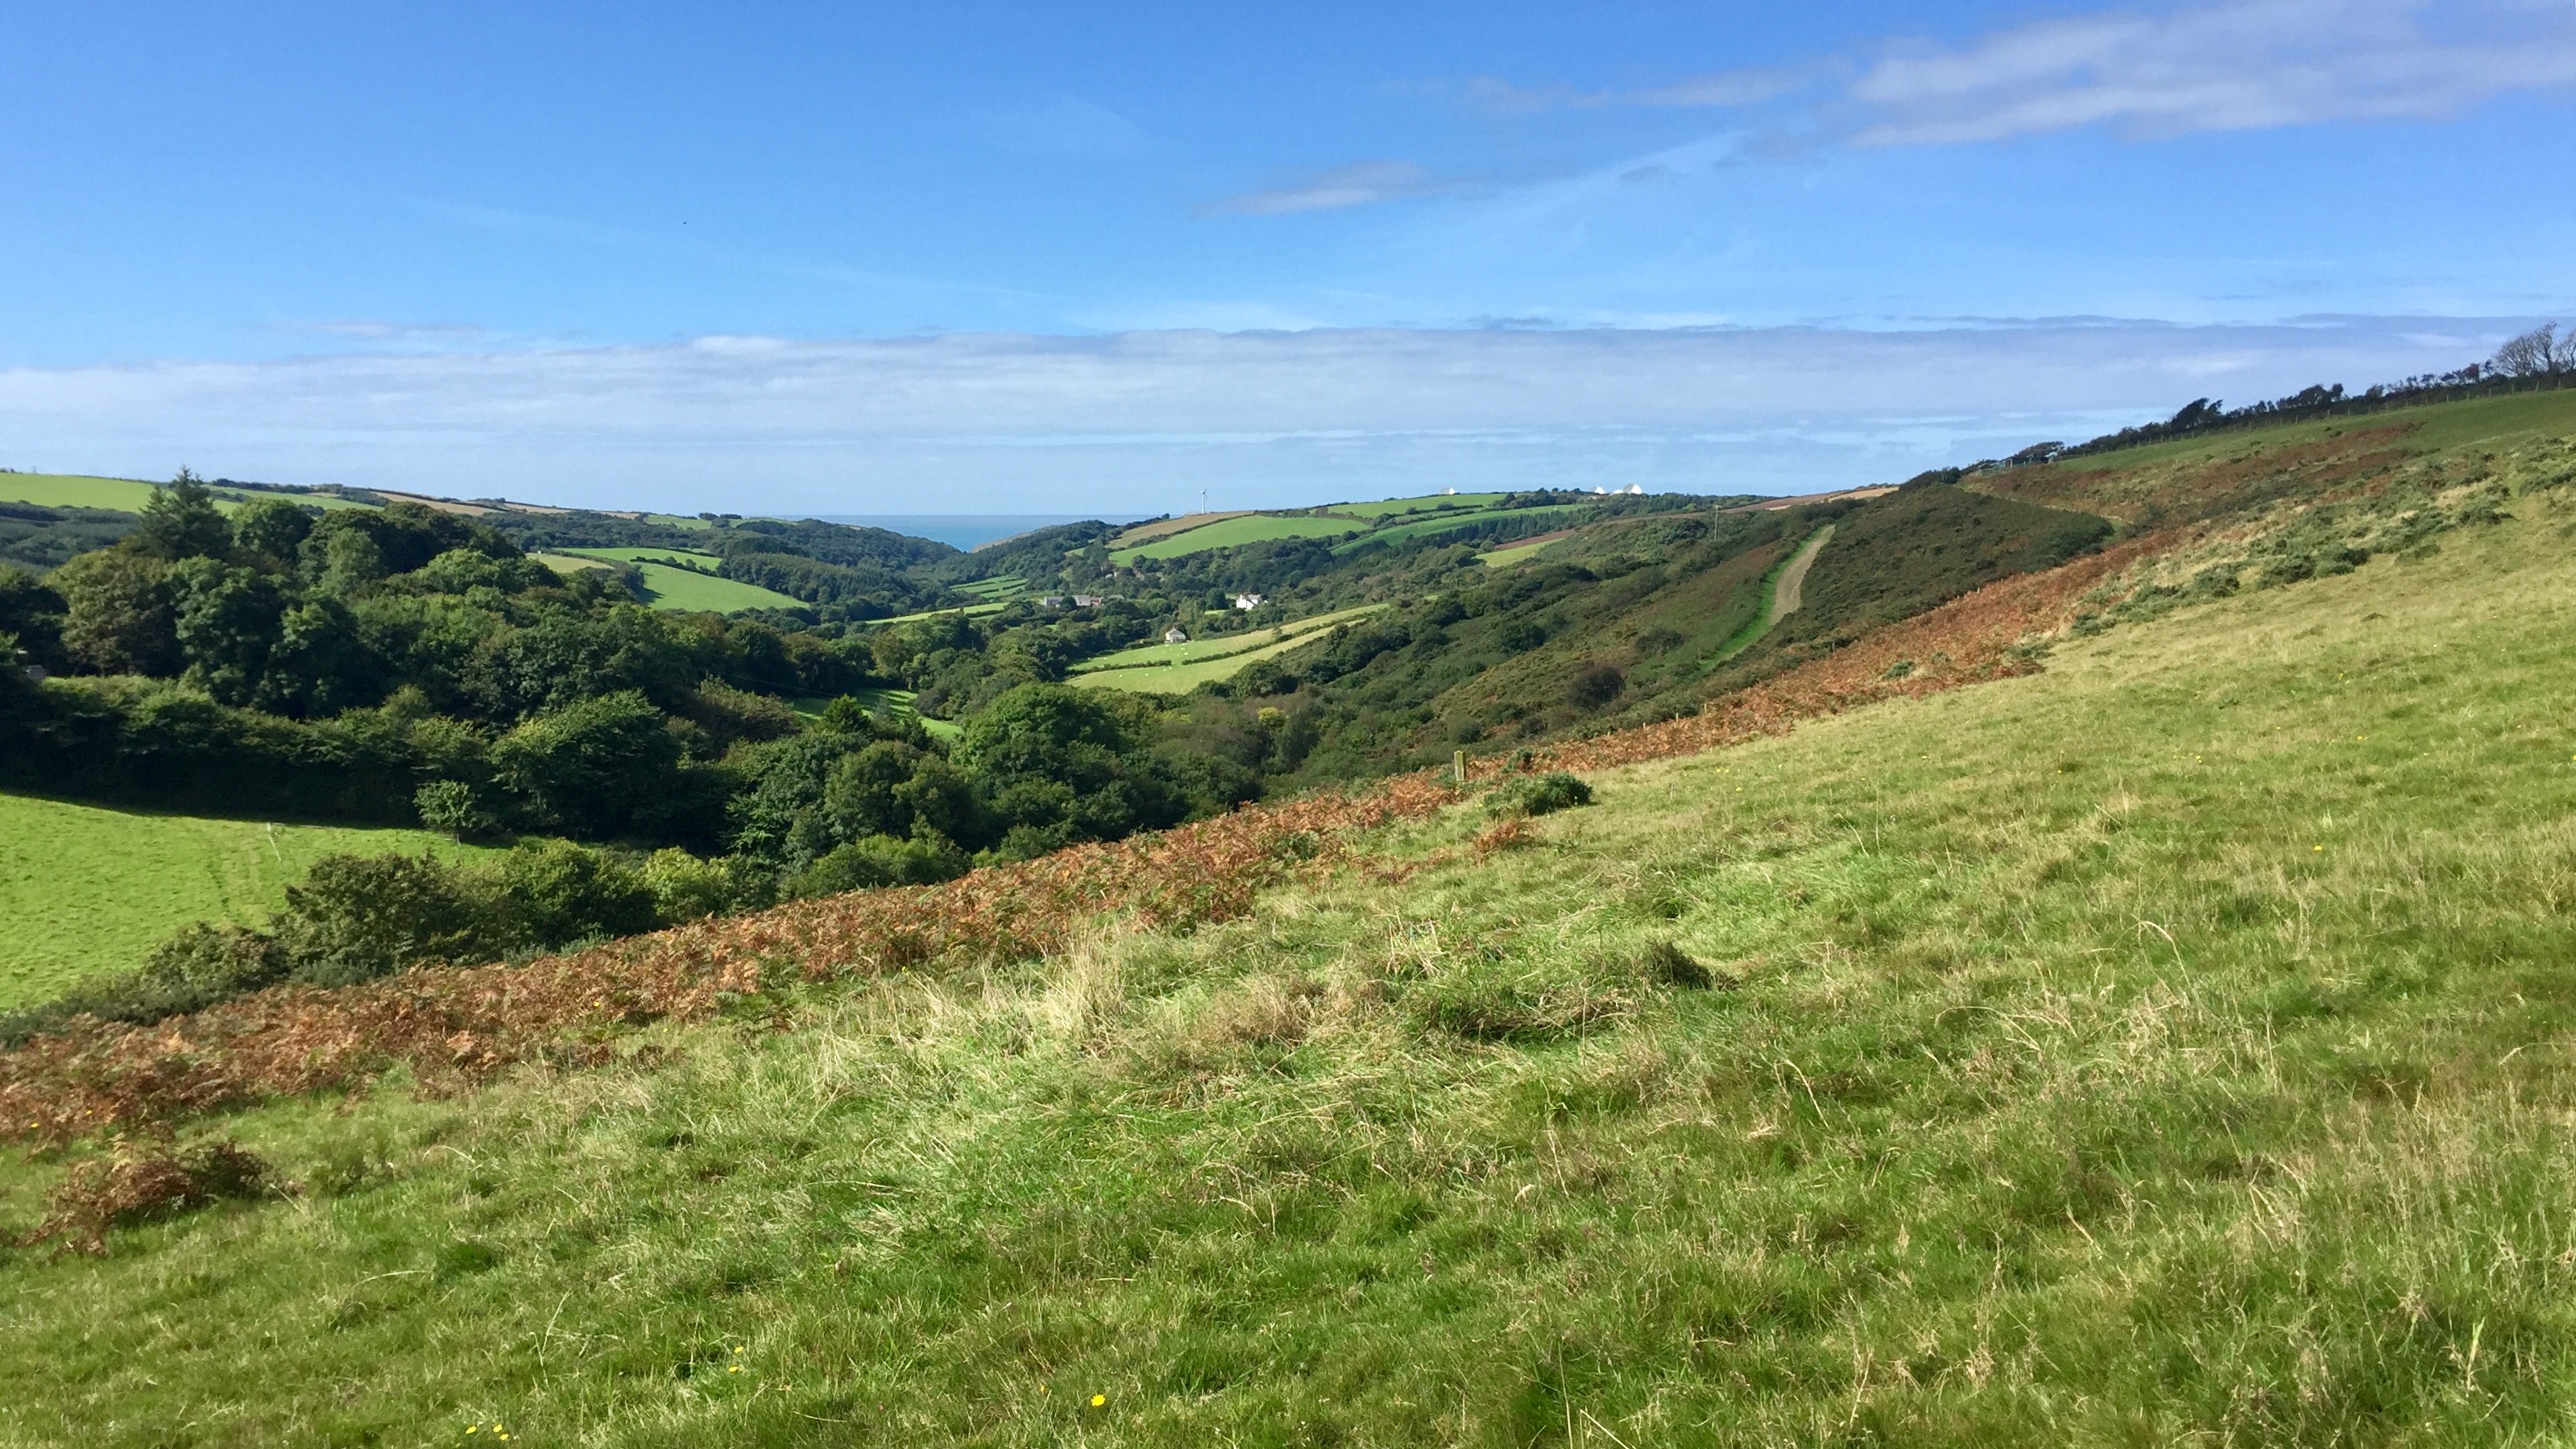 A photograph of Kilkhampton Common looking towards the Atlantic. Green sloping grassland, wooded valleys with the sea in the far distance.